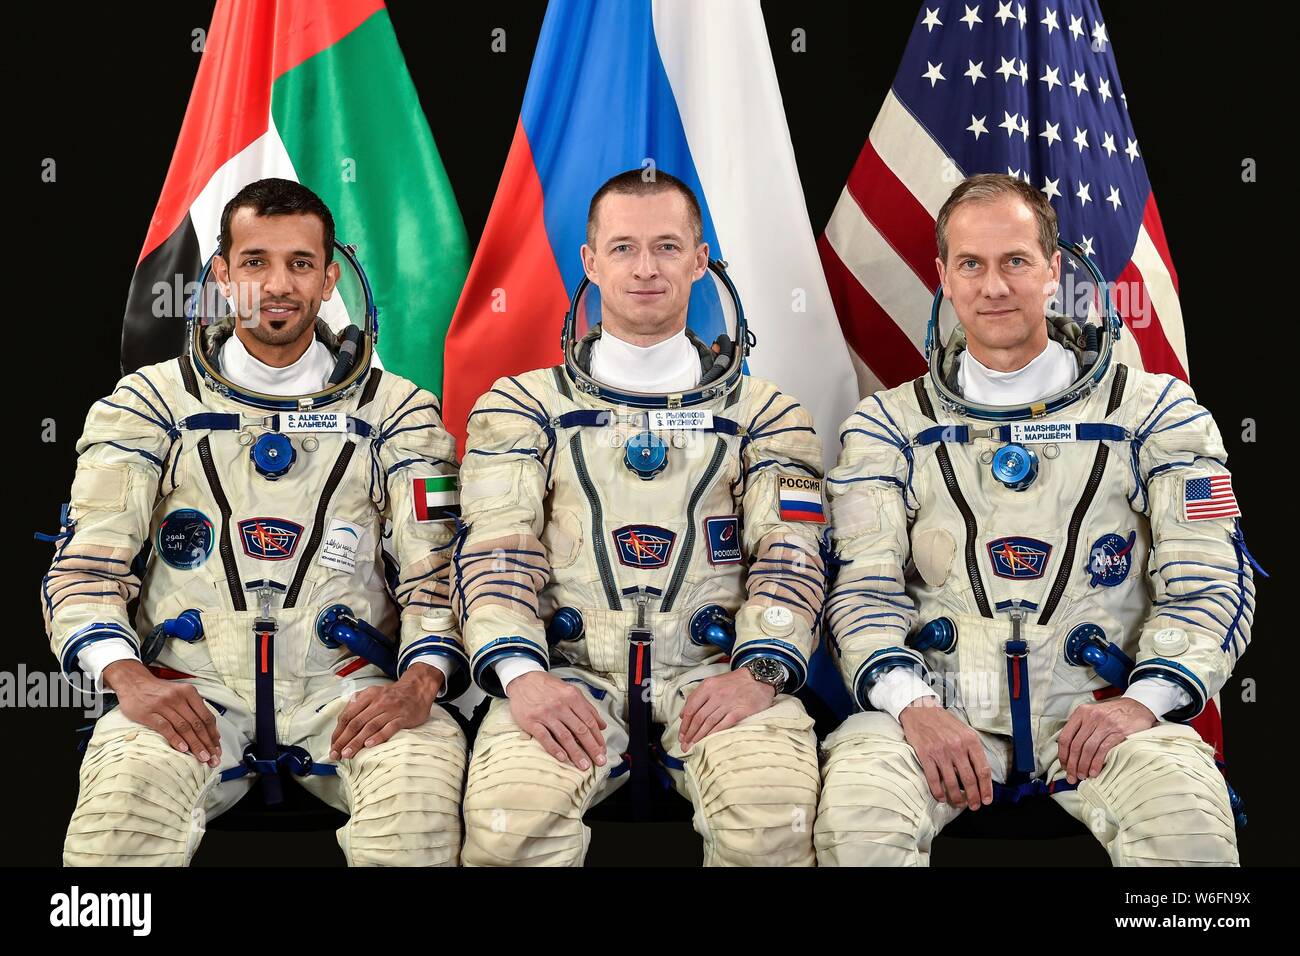 International Space Station Expedition 61-62 backup crew members Emirati participant Sultan al-Neyadi, left, Russian cosmonaut Sergey Ryzhikov and American astronaut Thomas Marshburn poses for a group portrait at the Gagarin Cosmonaut Training Center June 7, 2019 in Star City, Russia. Expedition 61-62 is expected to launch to the International Space Station on September 25, 2019. Stock Photo